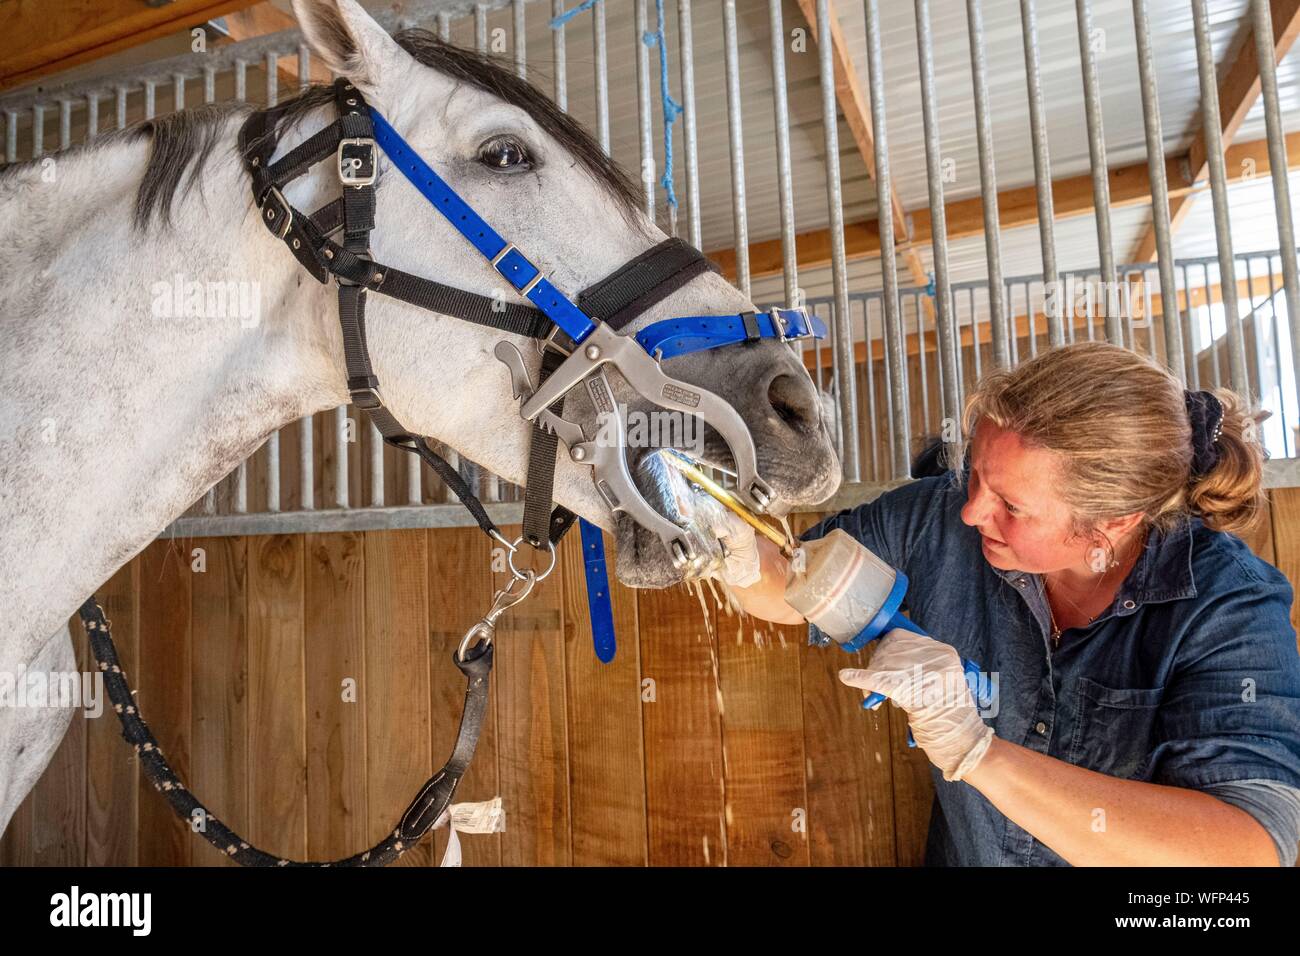 Equine Dentist High Resolution Stock Photography and Images - Alamy